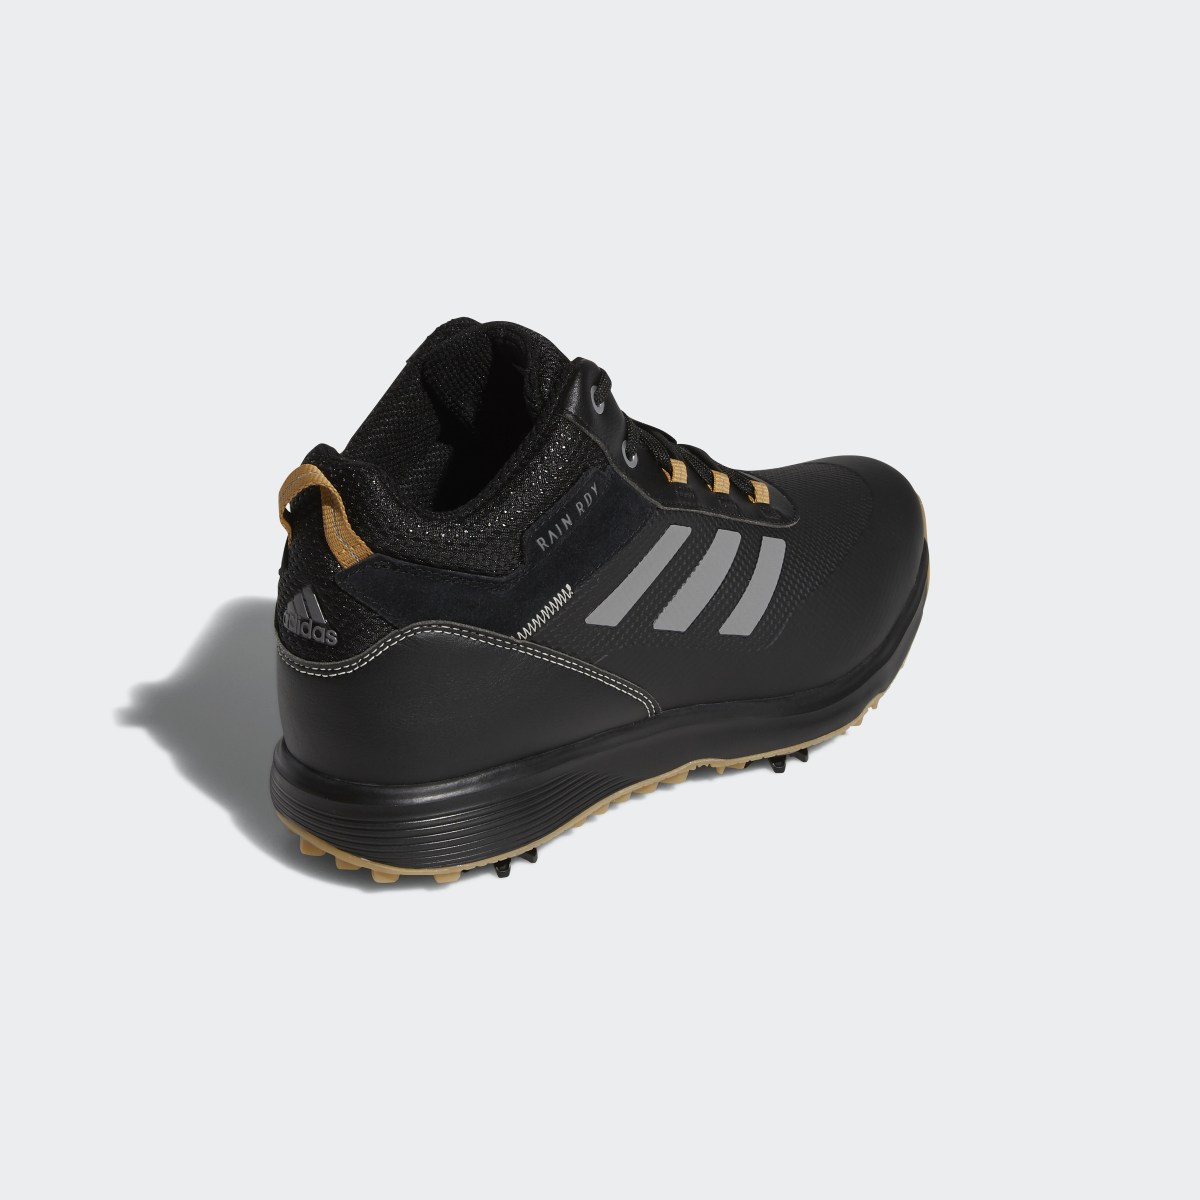 Adidas S2G Recycled Polyester Mid-Cut Golf Shoes. 8